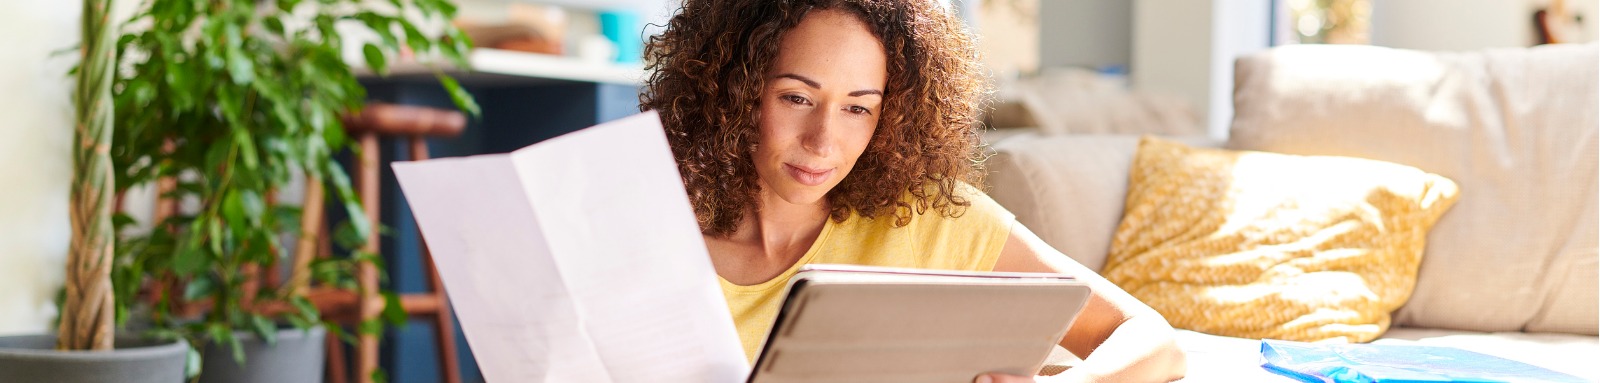 Woman looking at papers and tablet screen